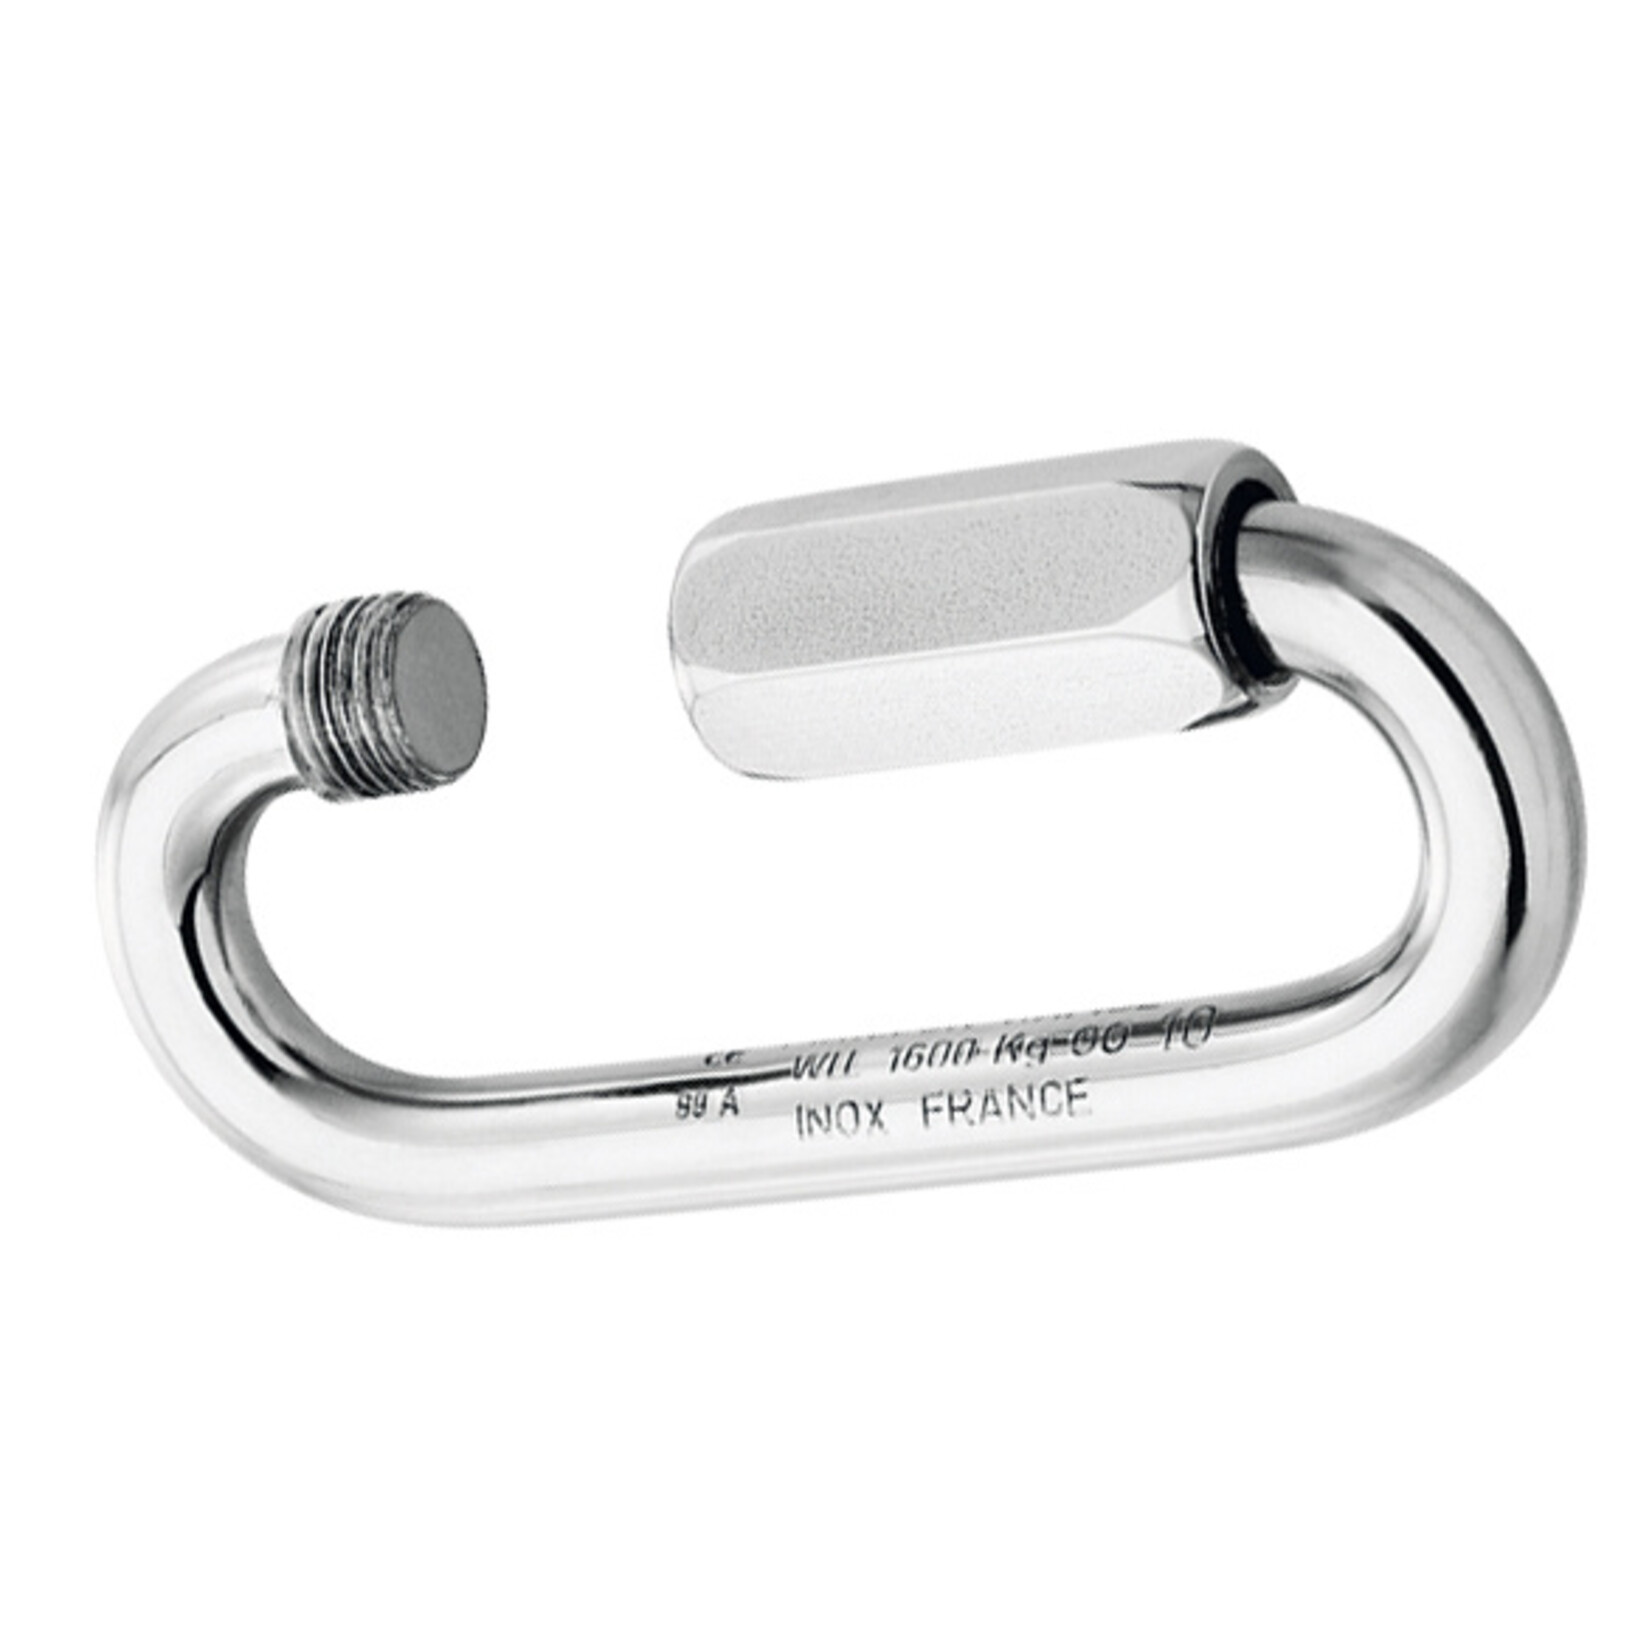 Plastimo Shackle express st.s big opening dia 7mm